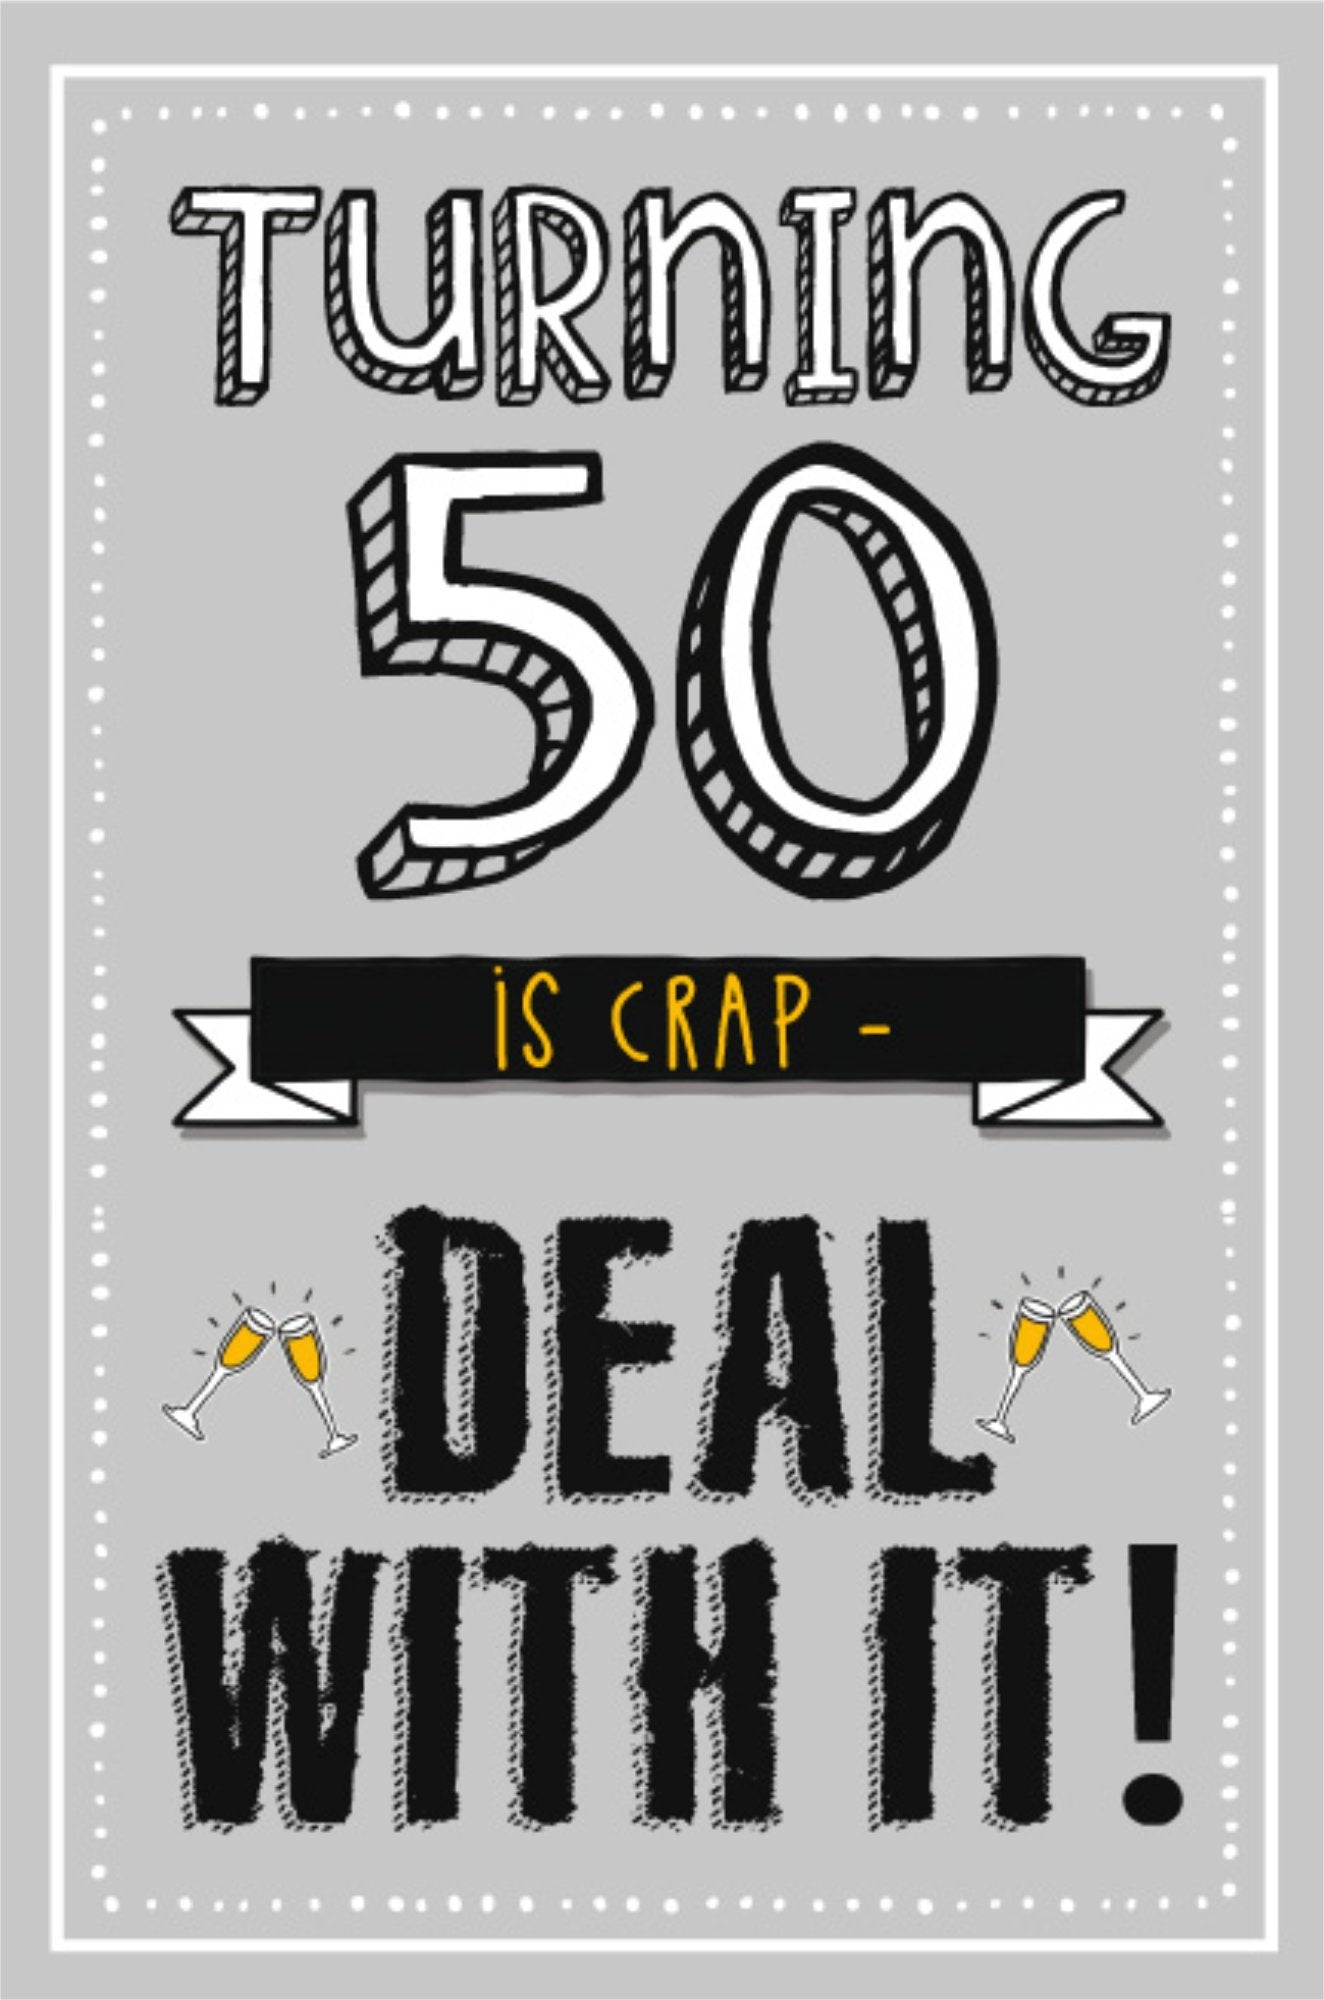 Photograph of Crap 50th Funny Birthday Greetings Card at Nicole's Shop